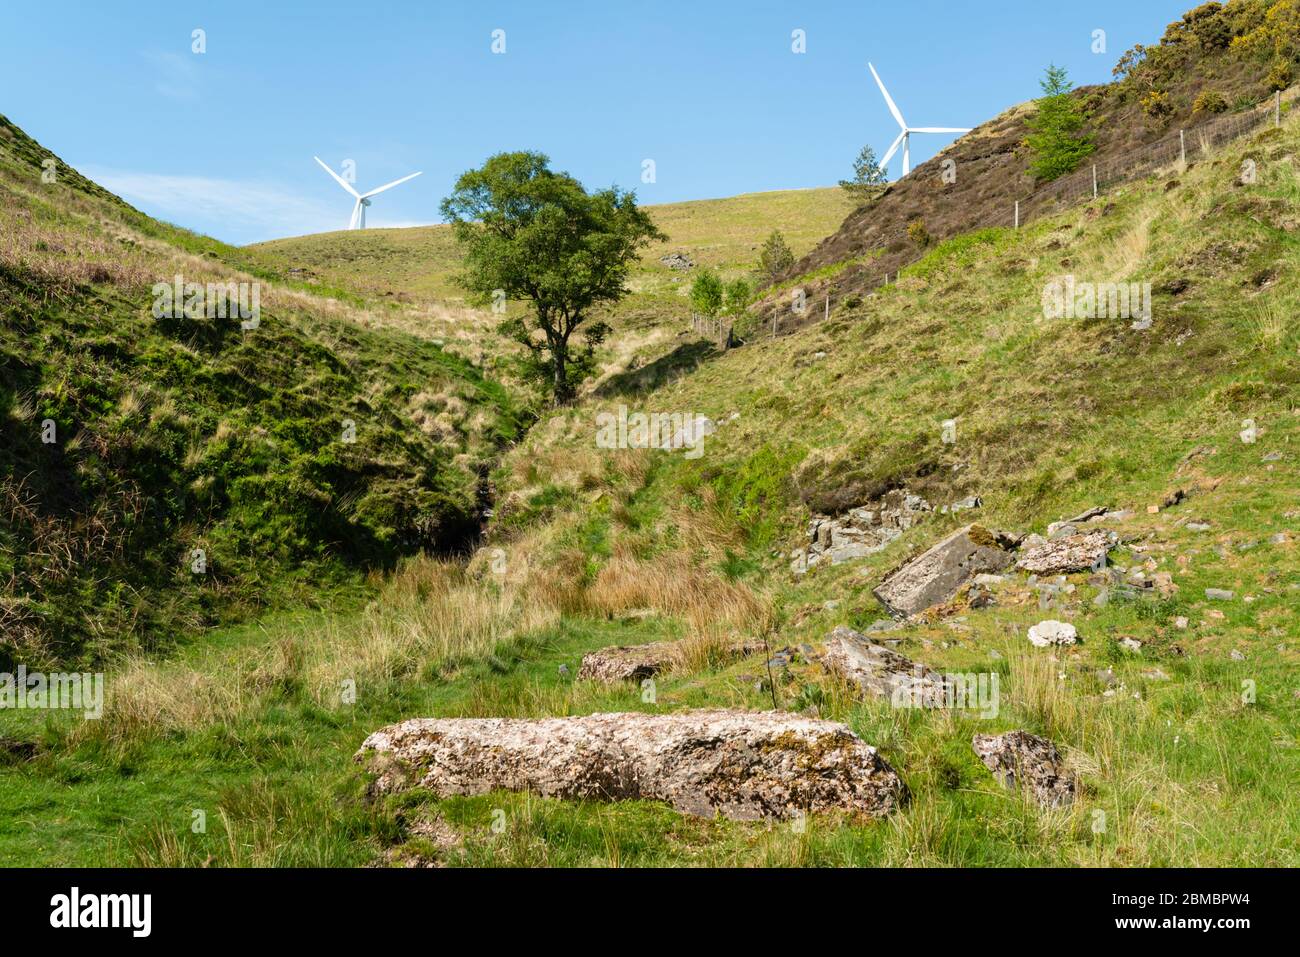 Lone tree in a valley with remianis of a building in the foreground and wind turbines on a hill in the distance Stock Photo